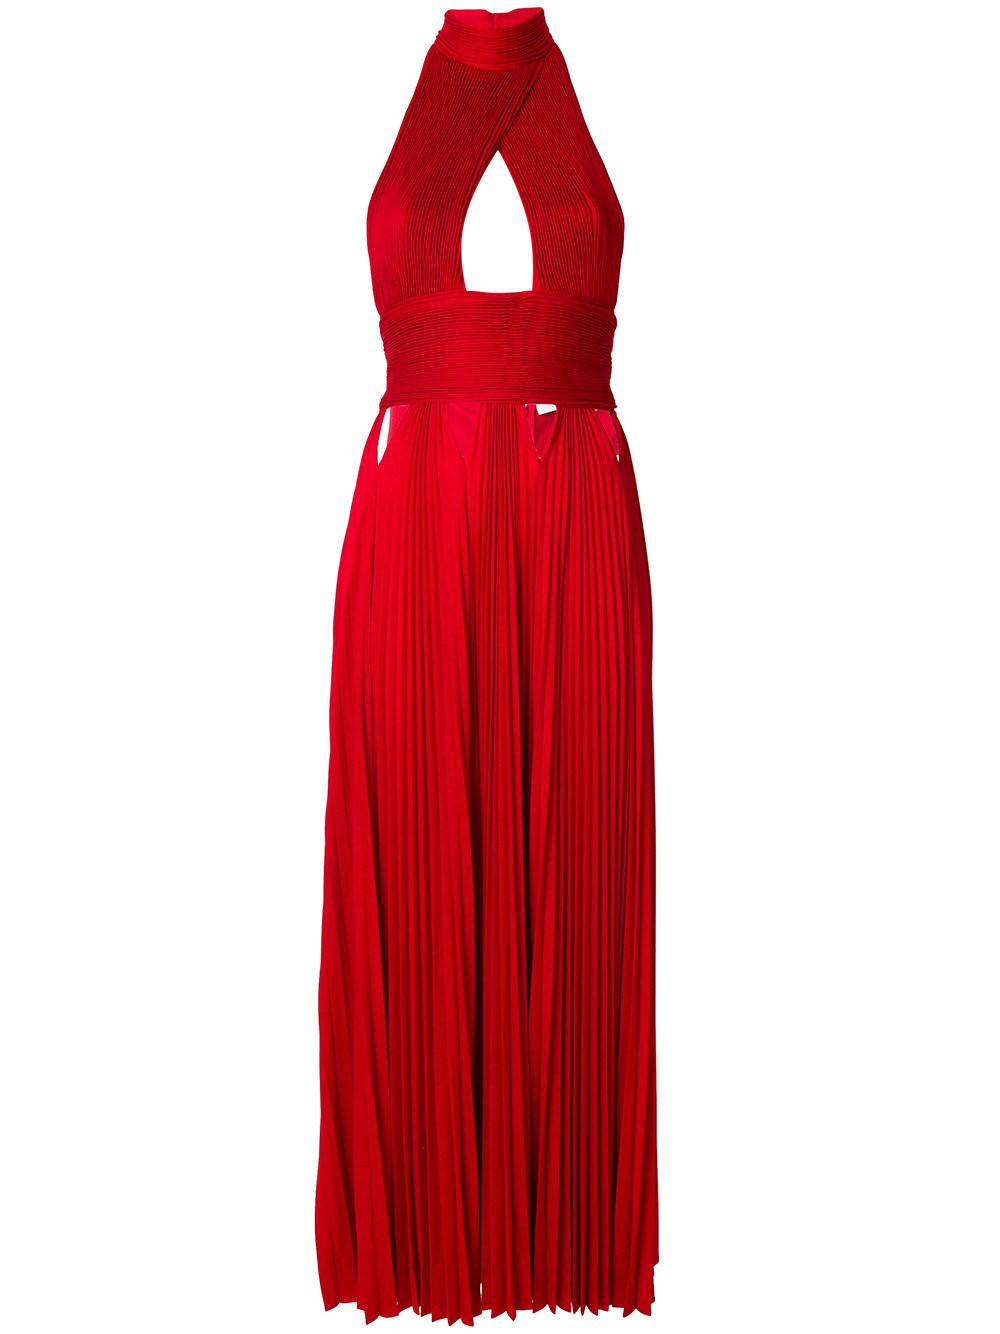 Lyst - Givenchy Halterneck Pleated Dress in Red